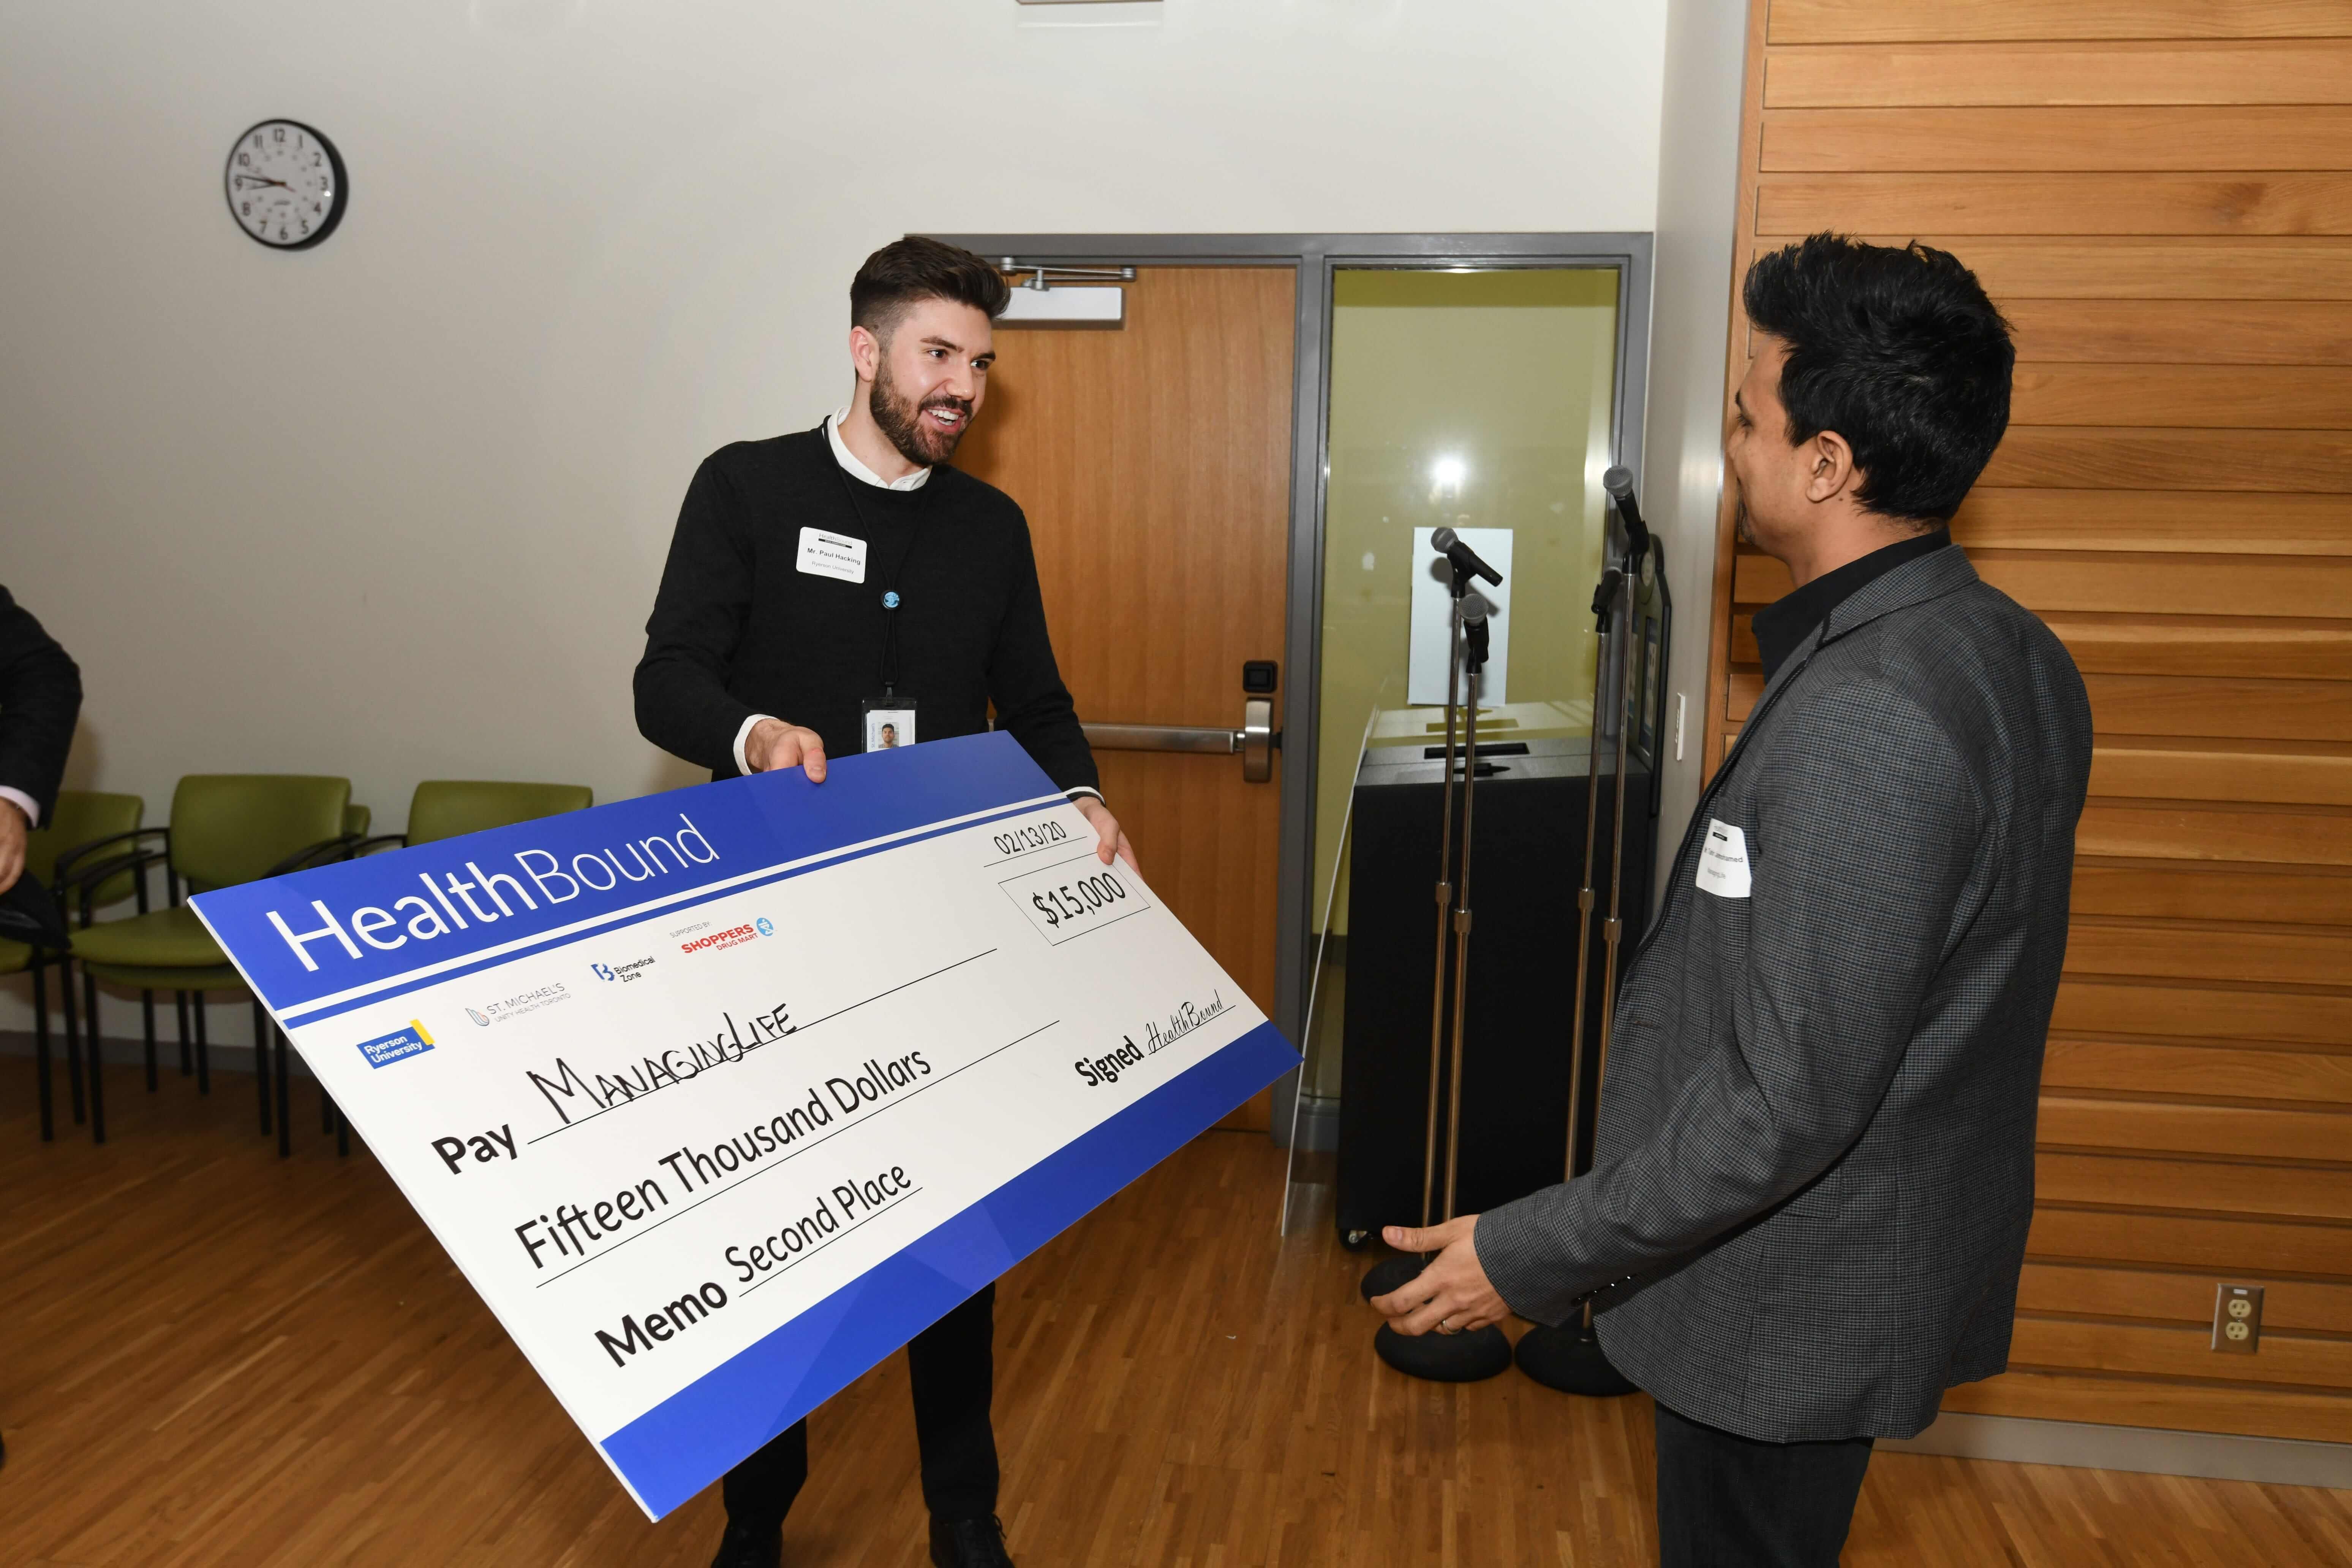 Winner of Healthbound pitch competition receives cheque